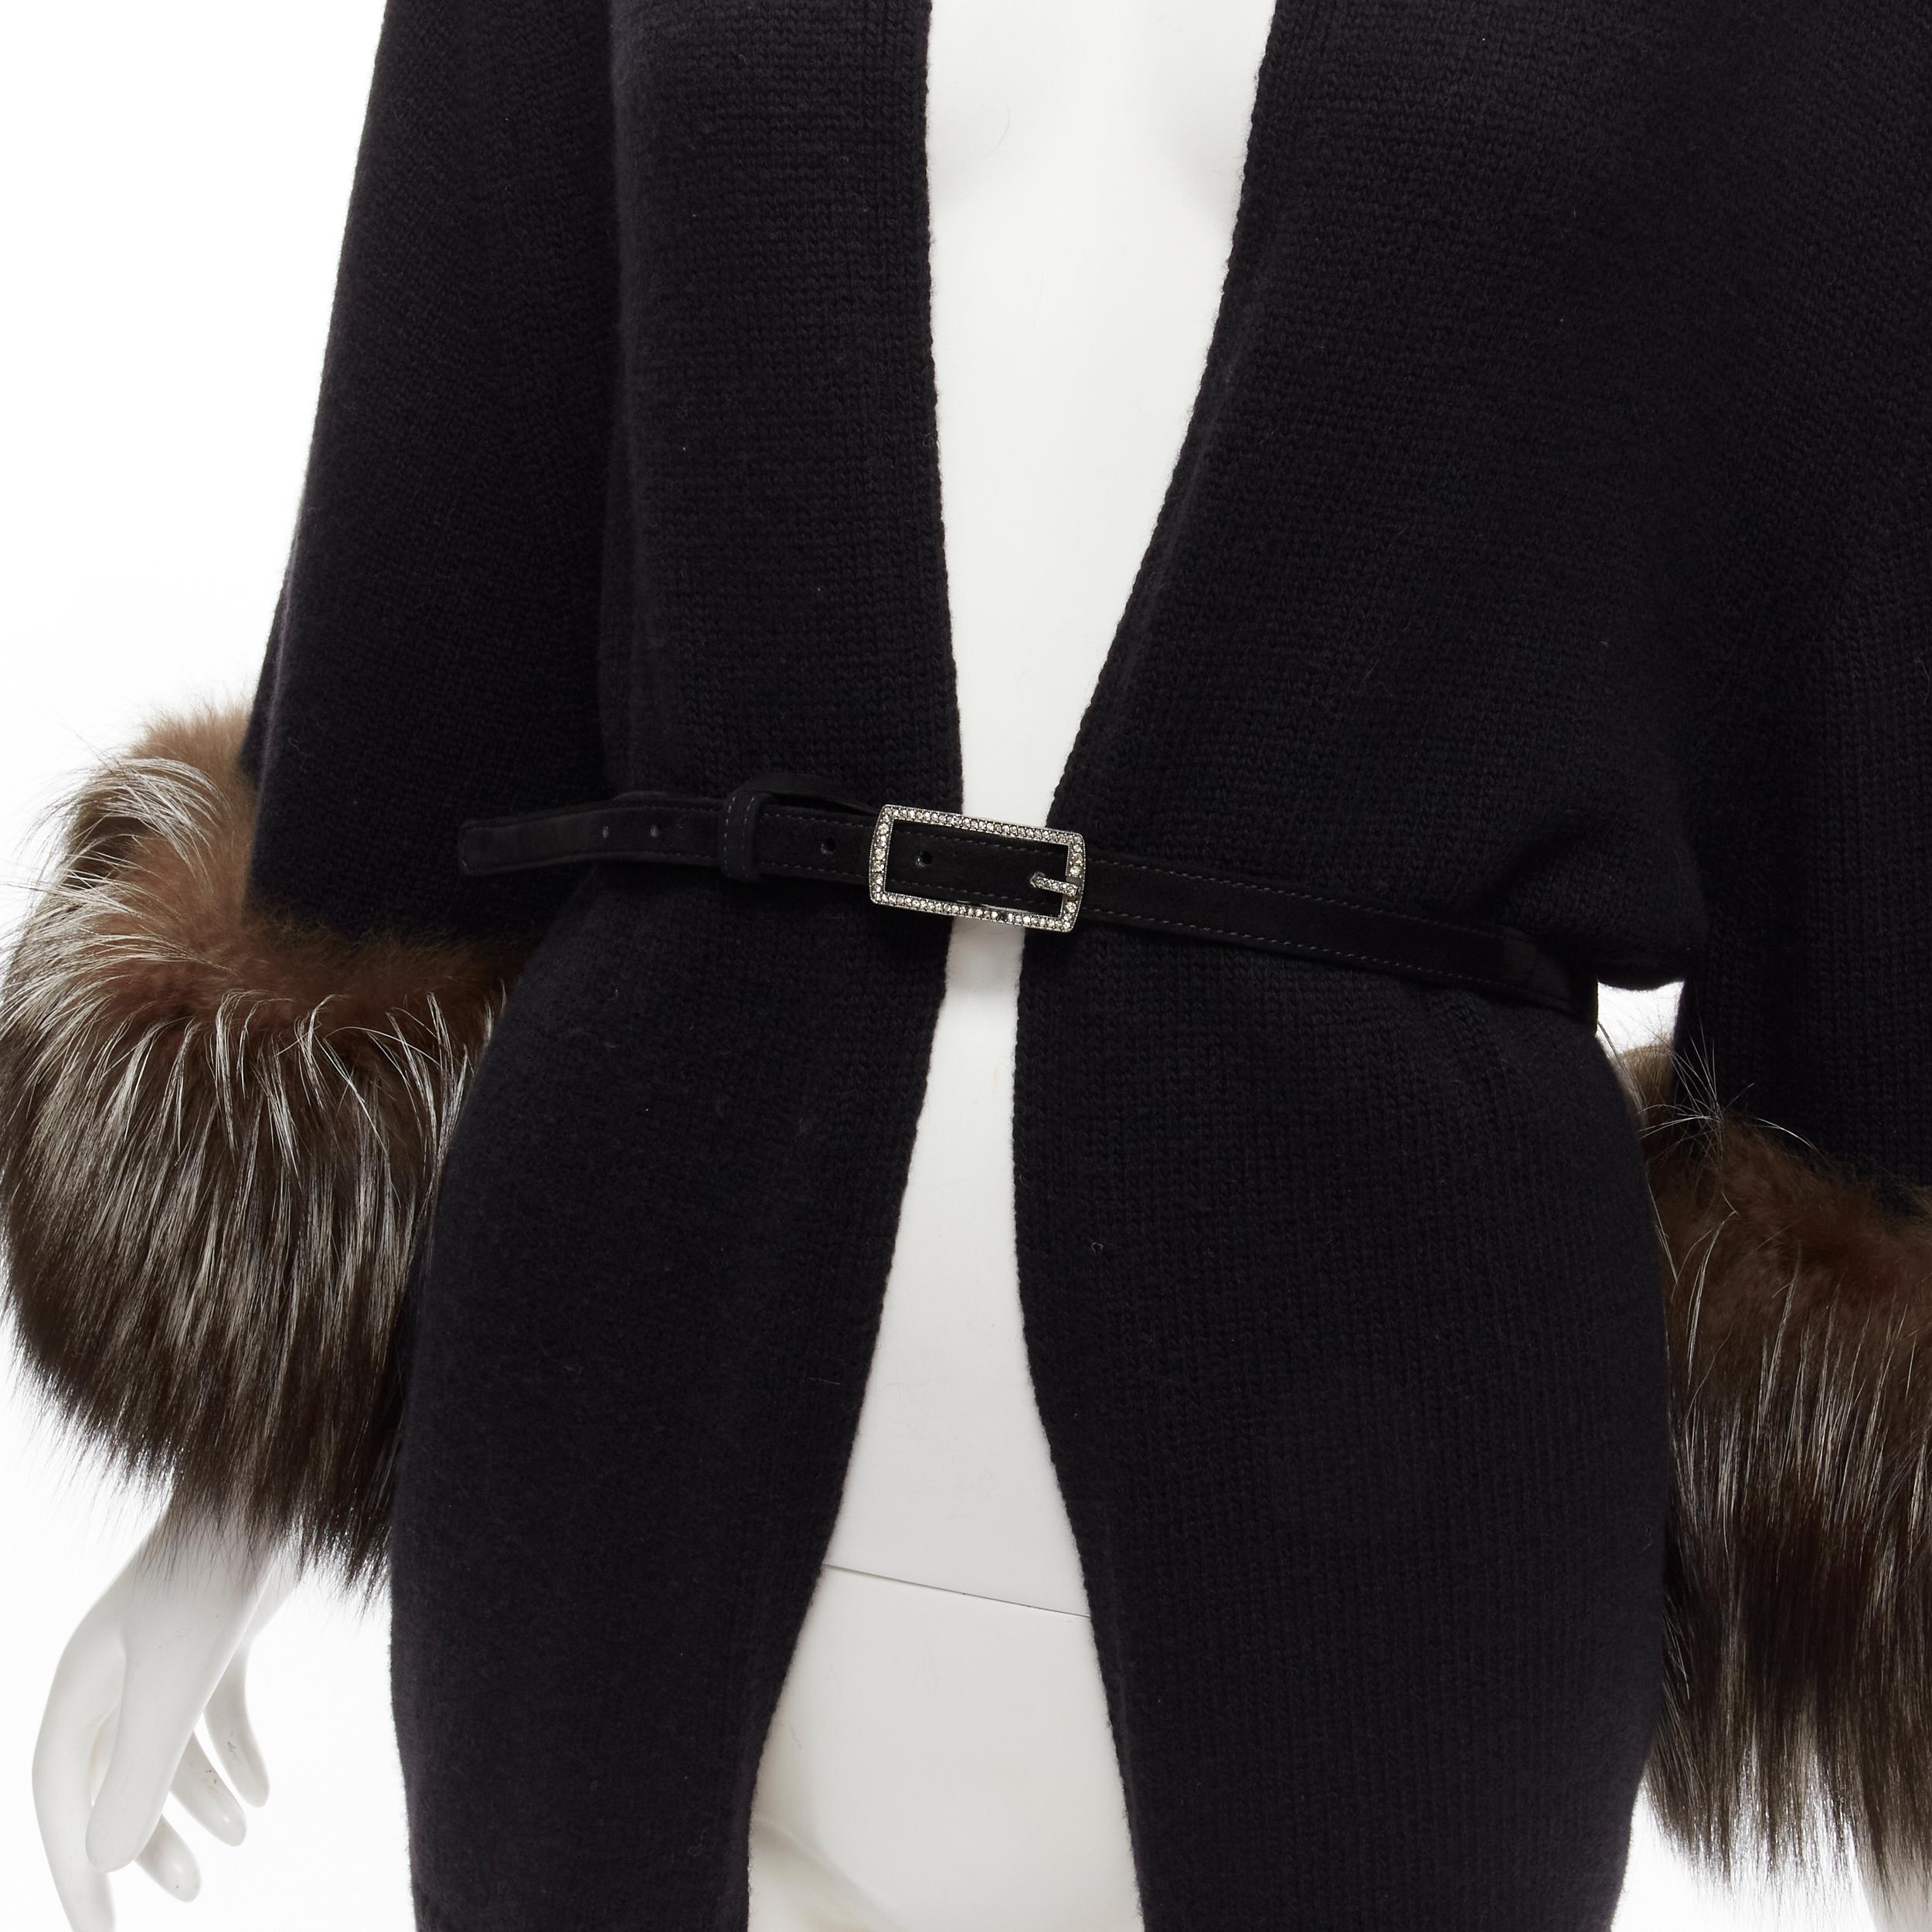 VALENTINO brown fur cuff black wool cashmere belted poncho cardigan jacket

Reference: TGAS/C01670

Brand: Valentino

Designer: Pier Paolo Piccioli

Material: Virgin Wool, Cashmere, Fur

Color: Black, Brown

Pattern: Solid

Closure: Belt

Extra